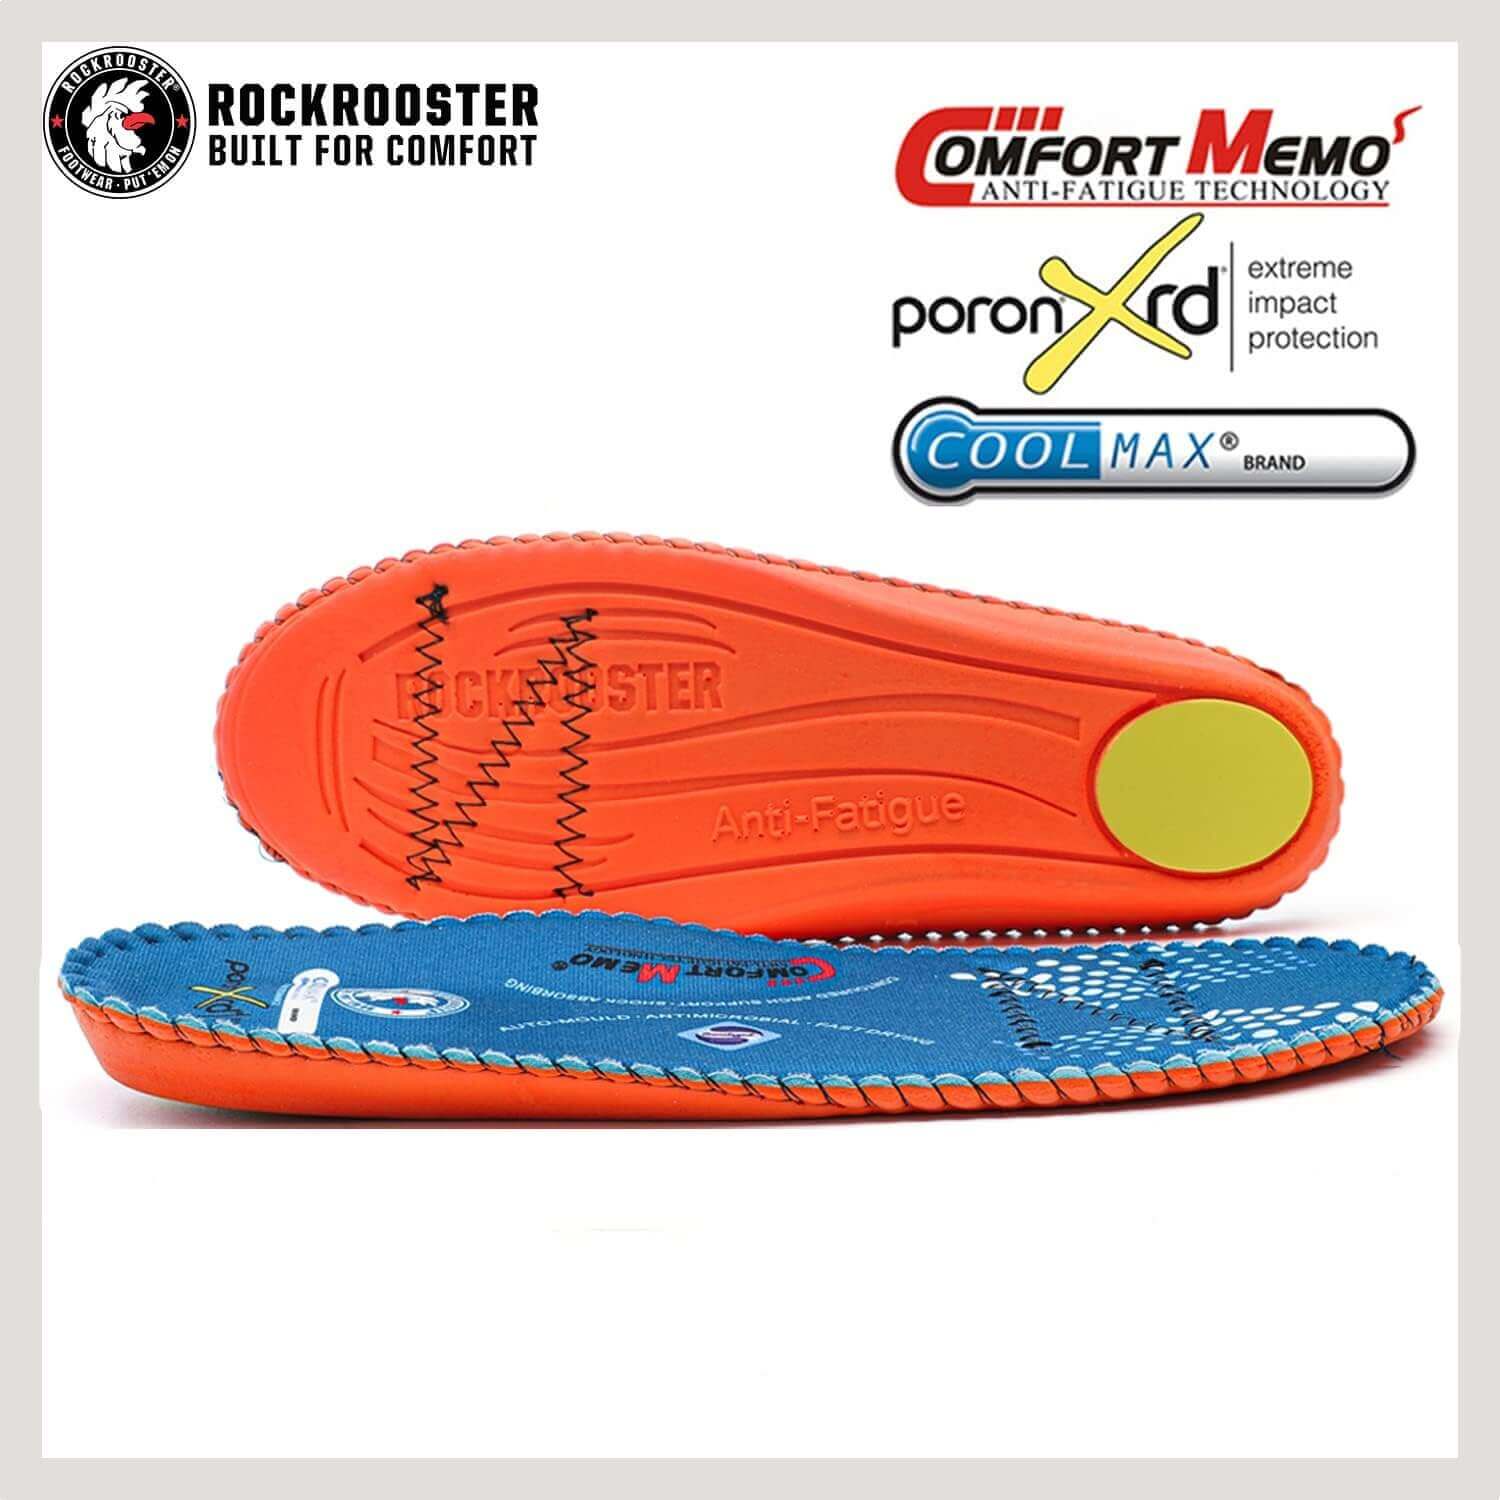 Shop The Latest >Arch Support Anti-Fatigue Replacement Insole > *Only $36.44*> From The Top Brand > *Rockroosterl* > Shop Now and Get Free Shipping On Orders Over $45.00 >*Shop Earth Foot*